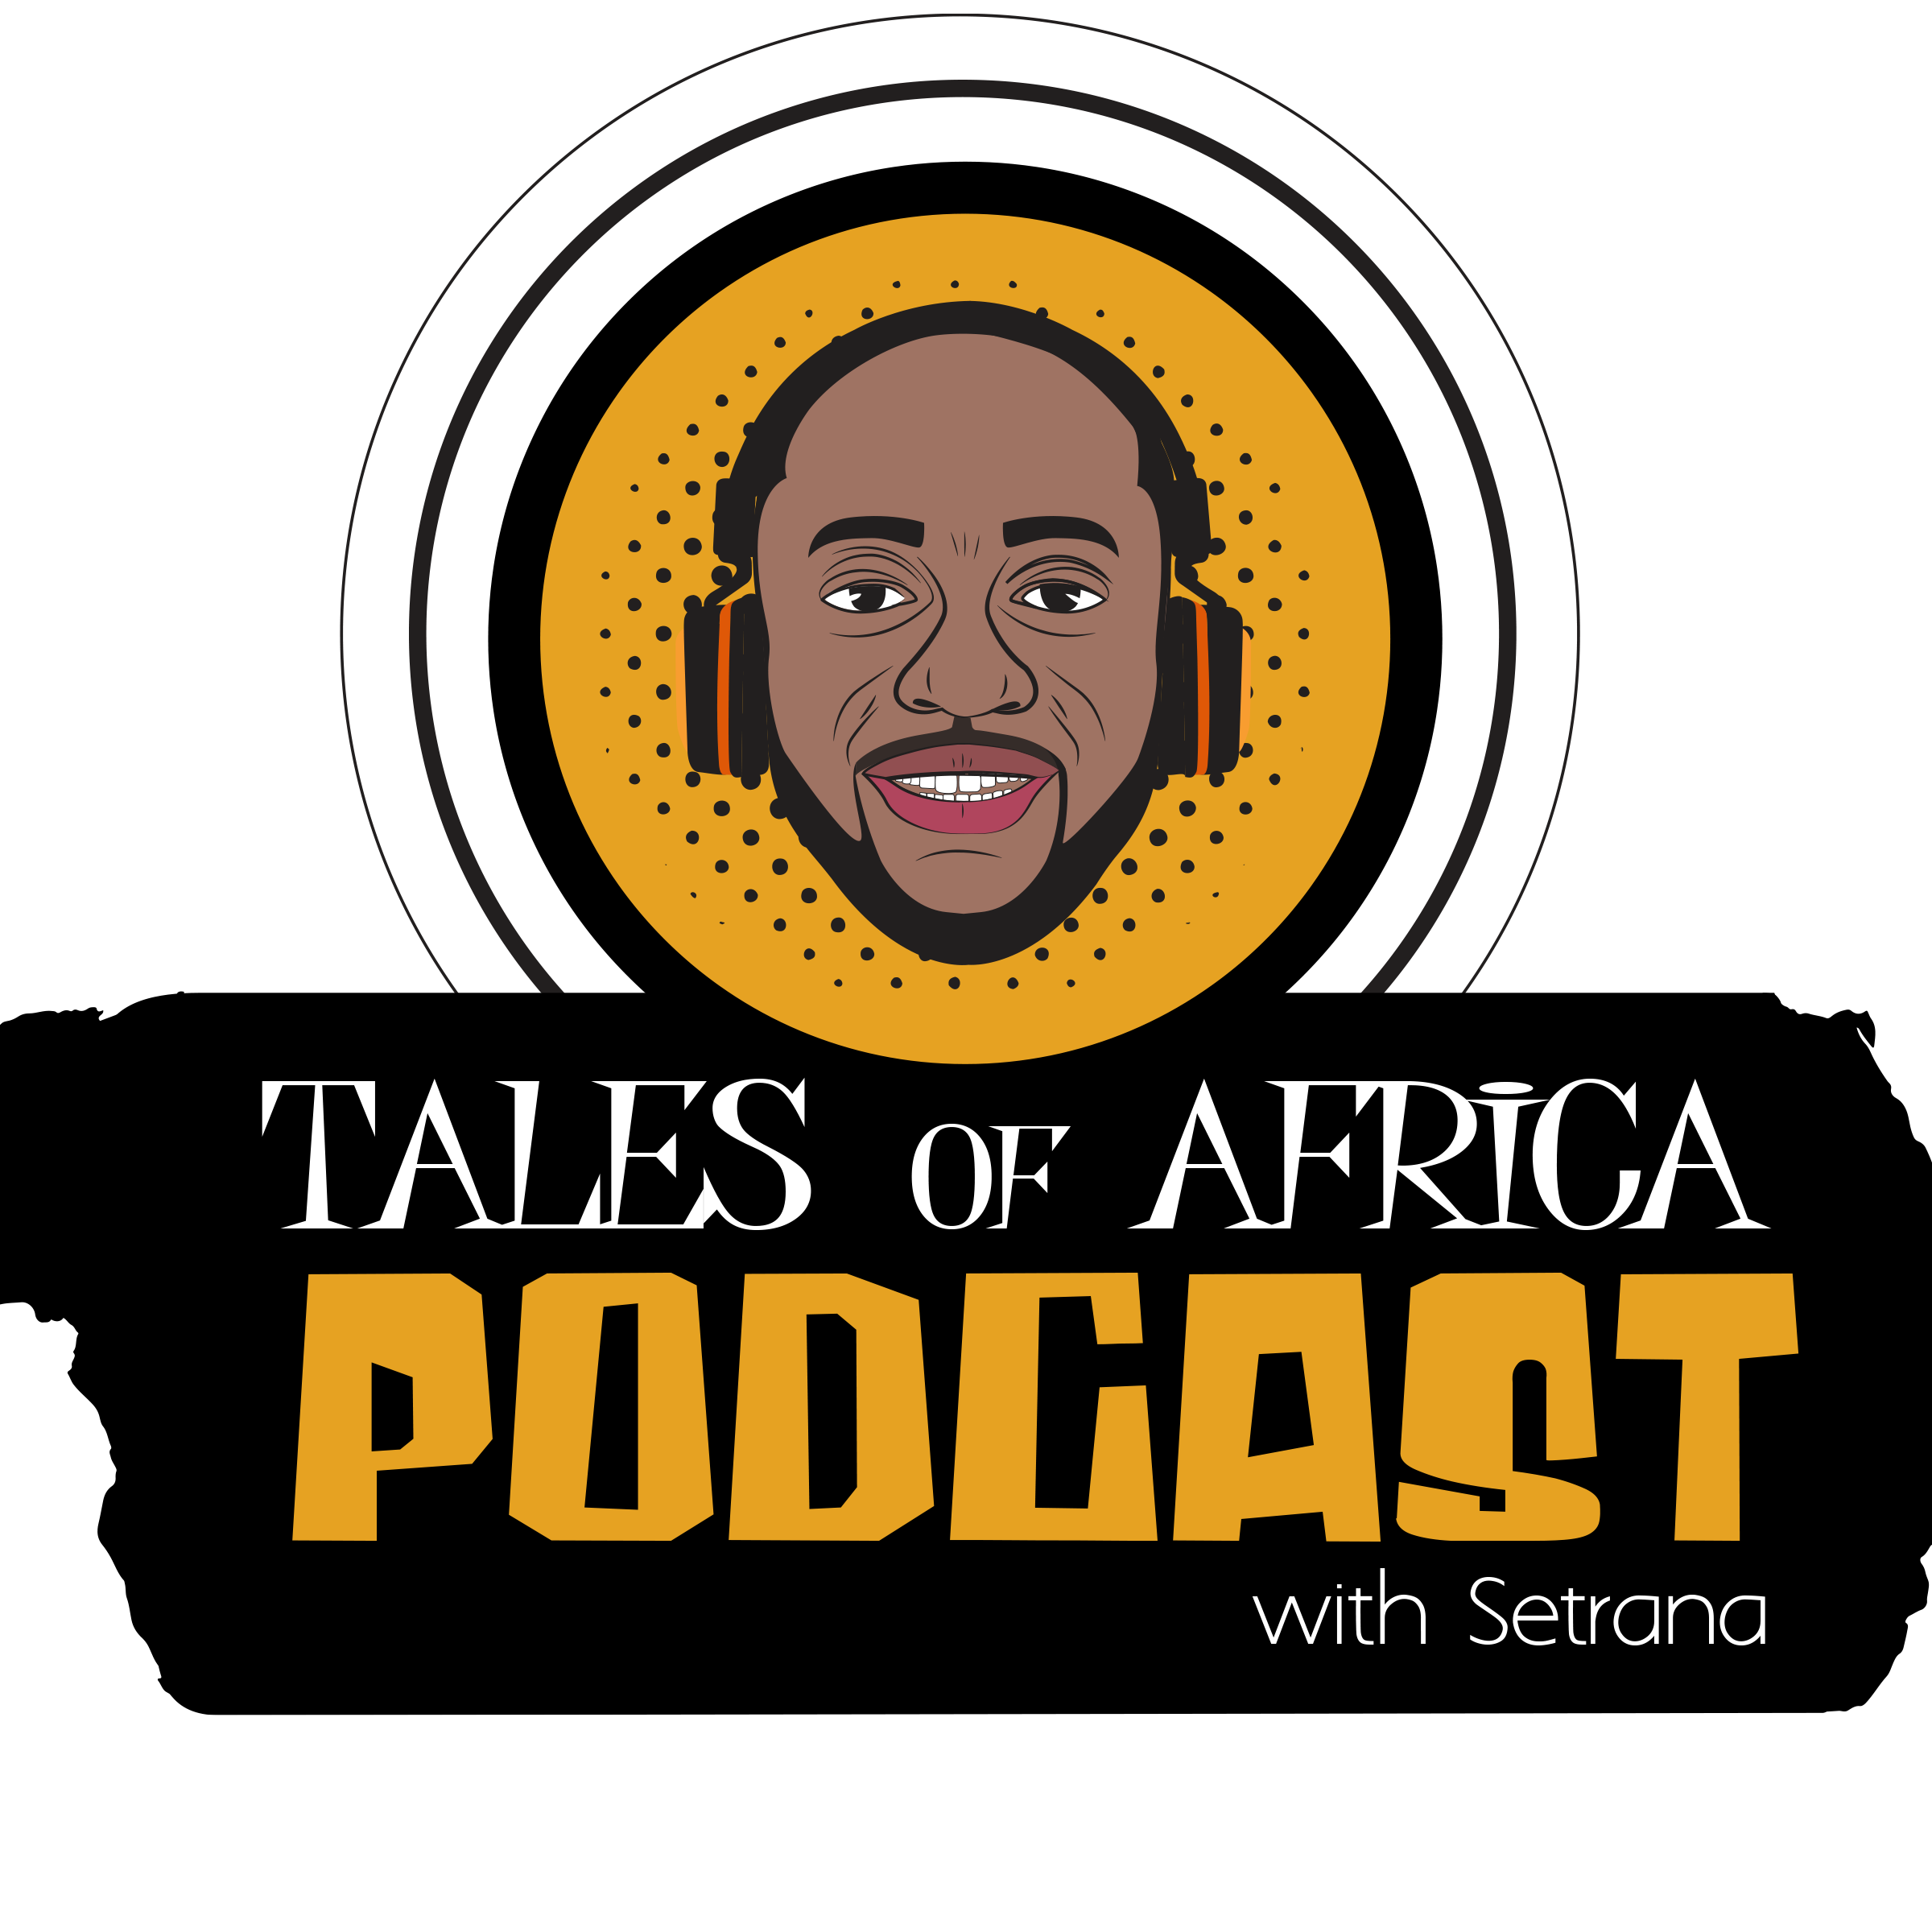 Tales of Africa Podcast